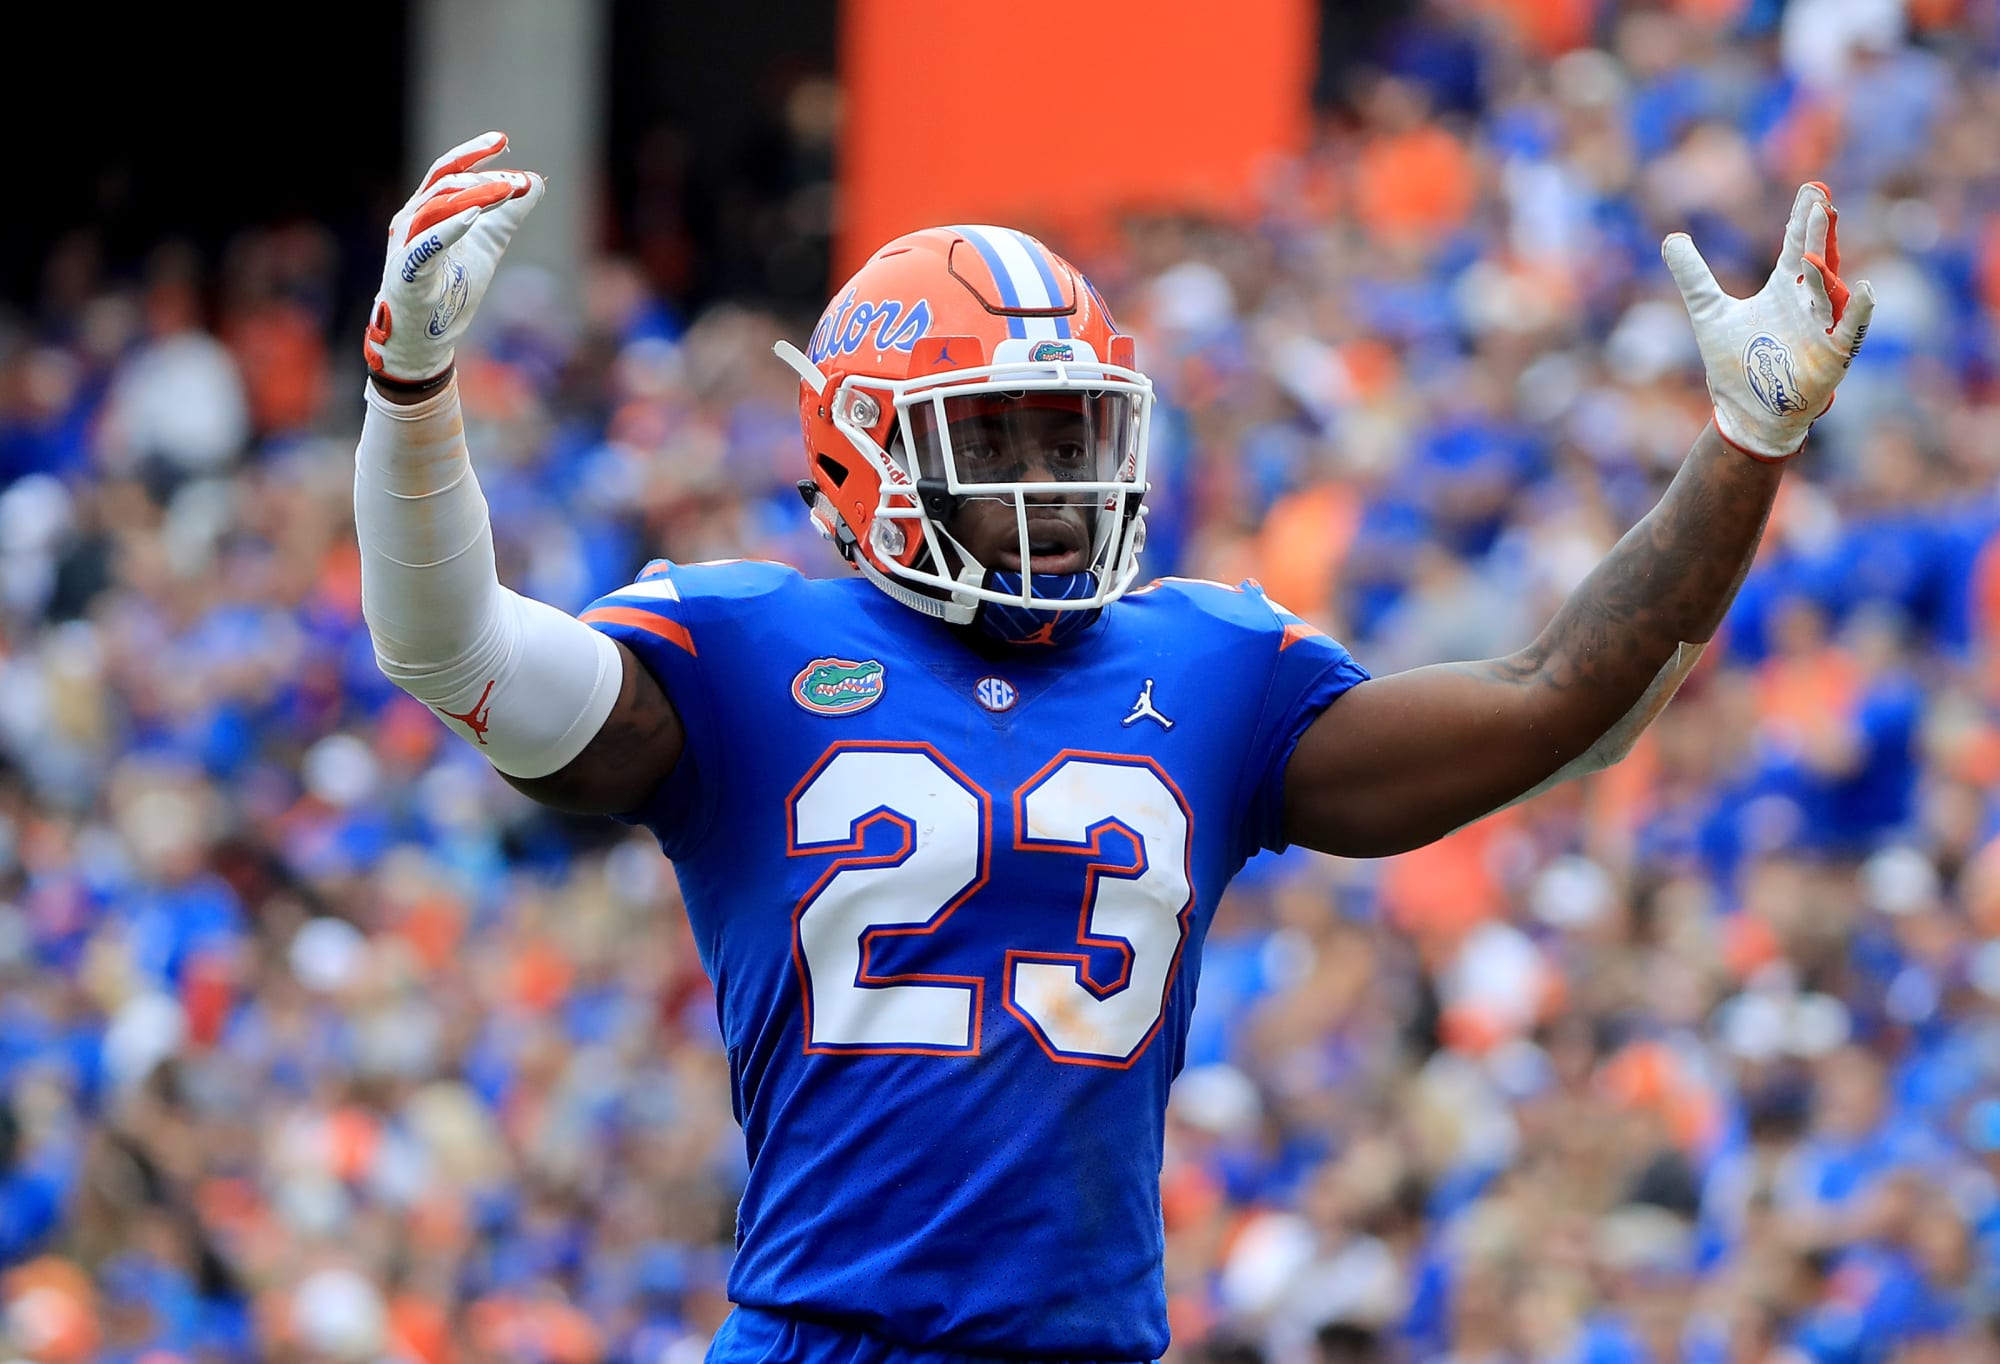 Florida Gators growl back in second half to secure 7th win of season